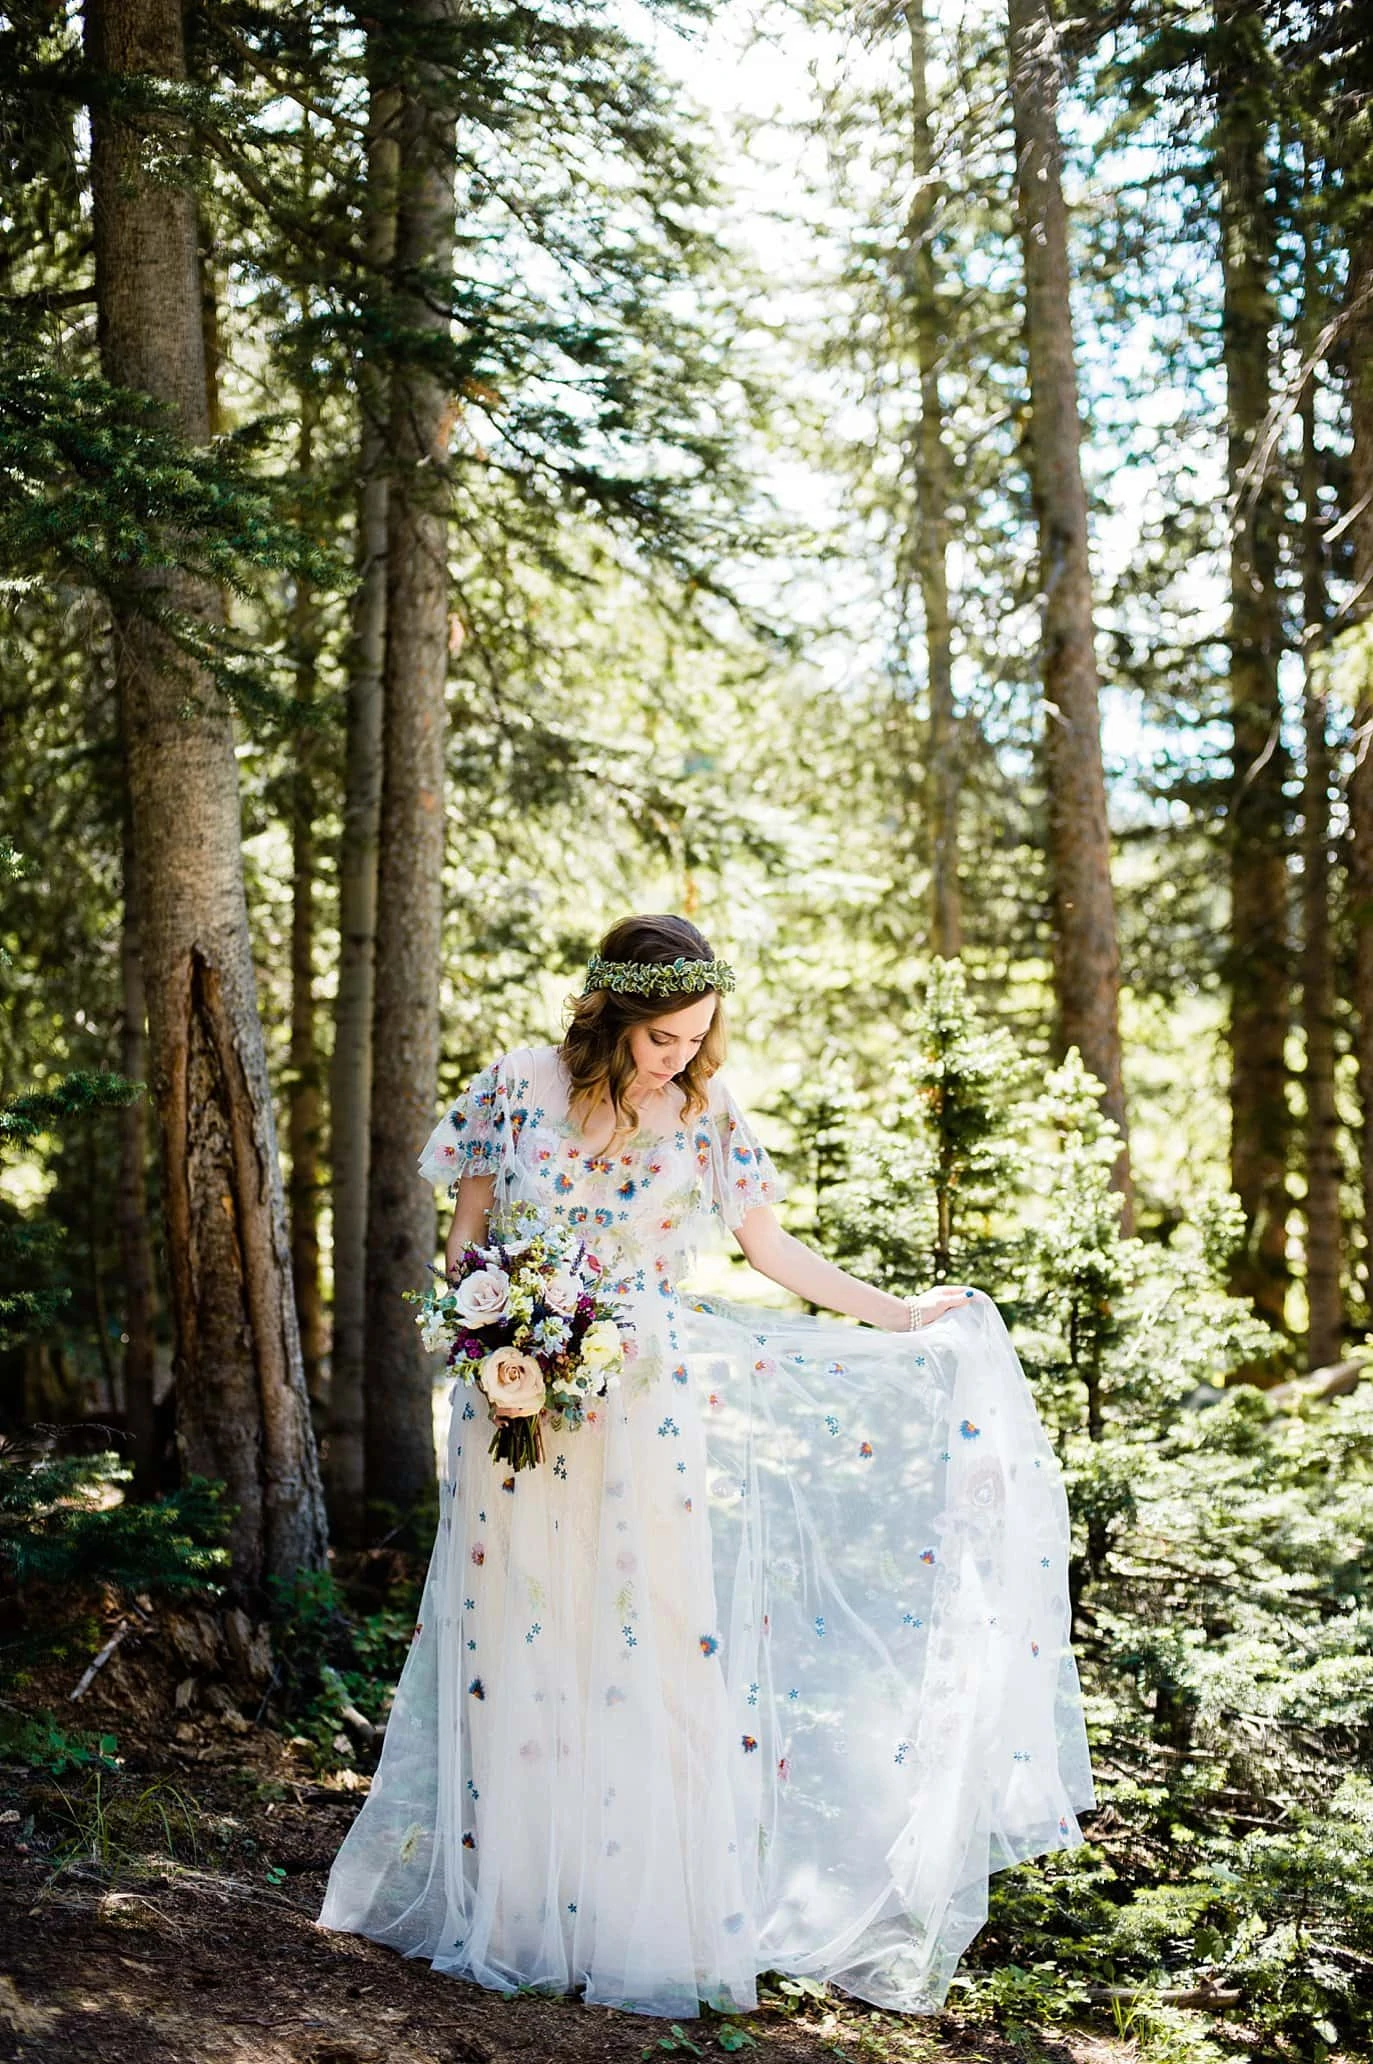 bride in unique floral chiffon wedding dress in sunlight in trees at Arapahoe Basin wedding by Frisco wedding photographer Jennie Crate